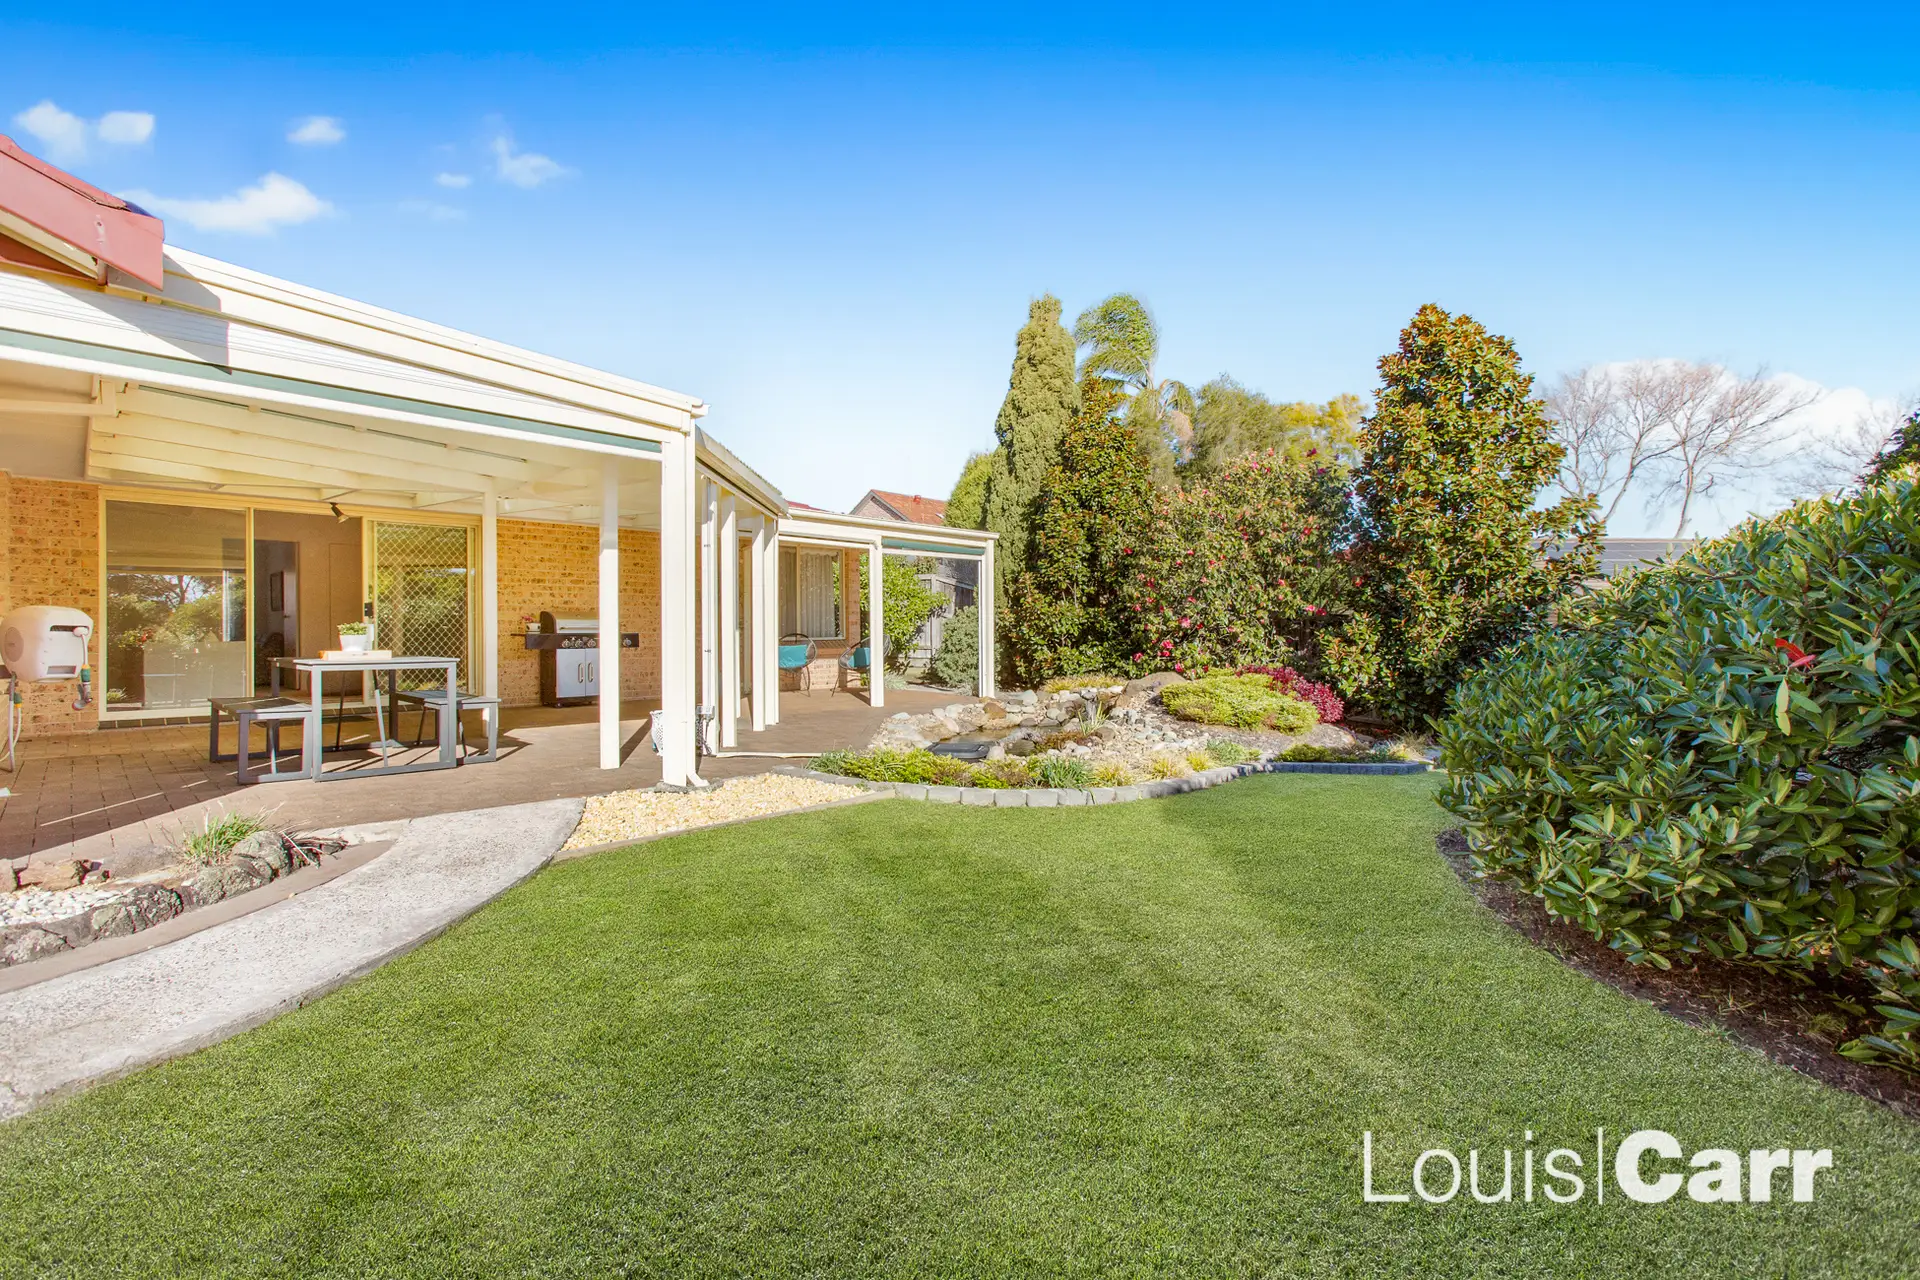 Photo #2: 6 Selina Place, Cherrybrook - Sold by Louis Carr Real Estate